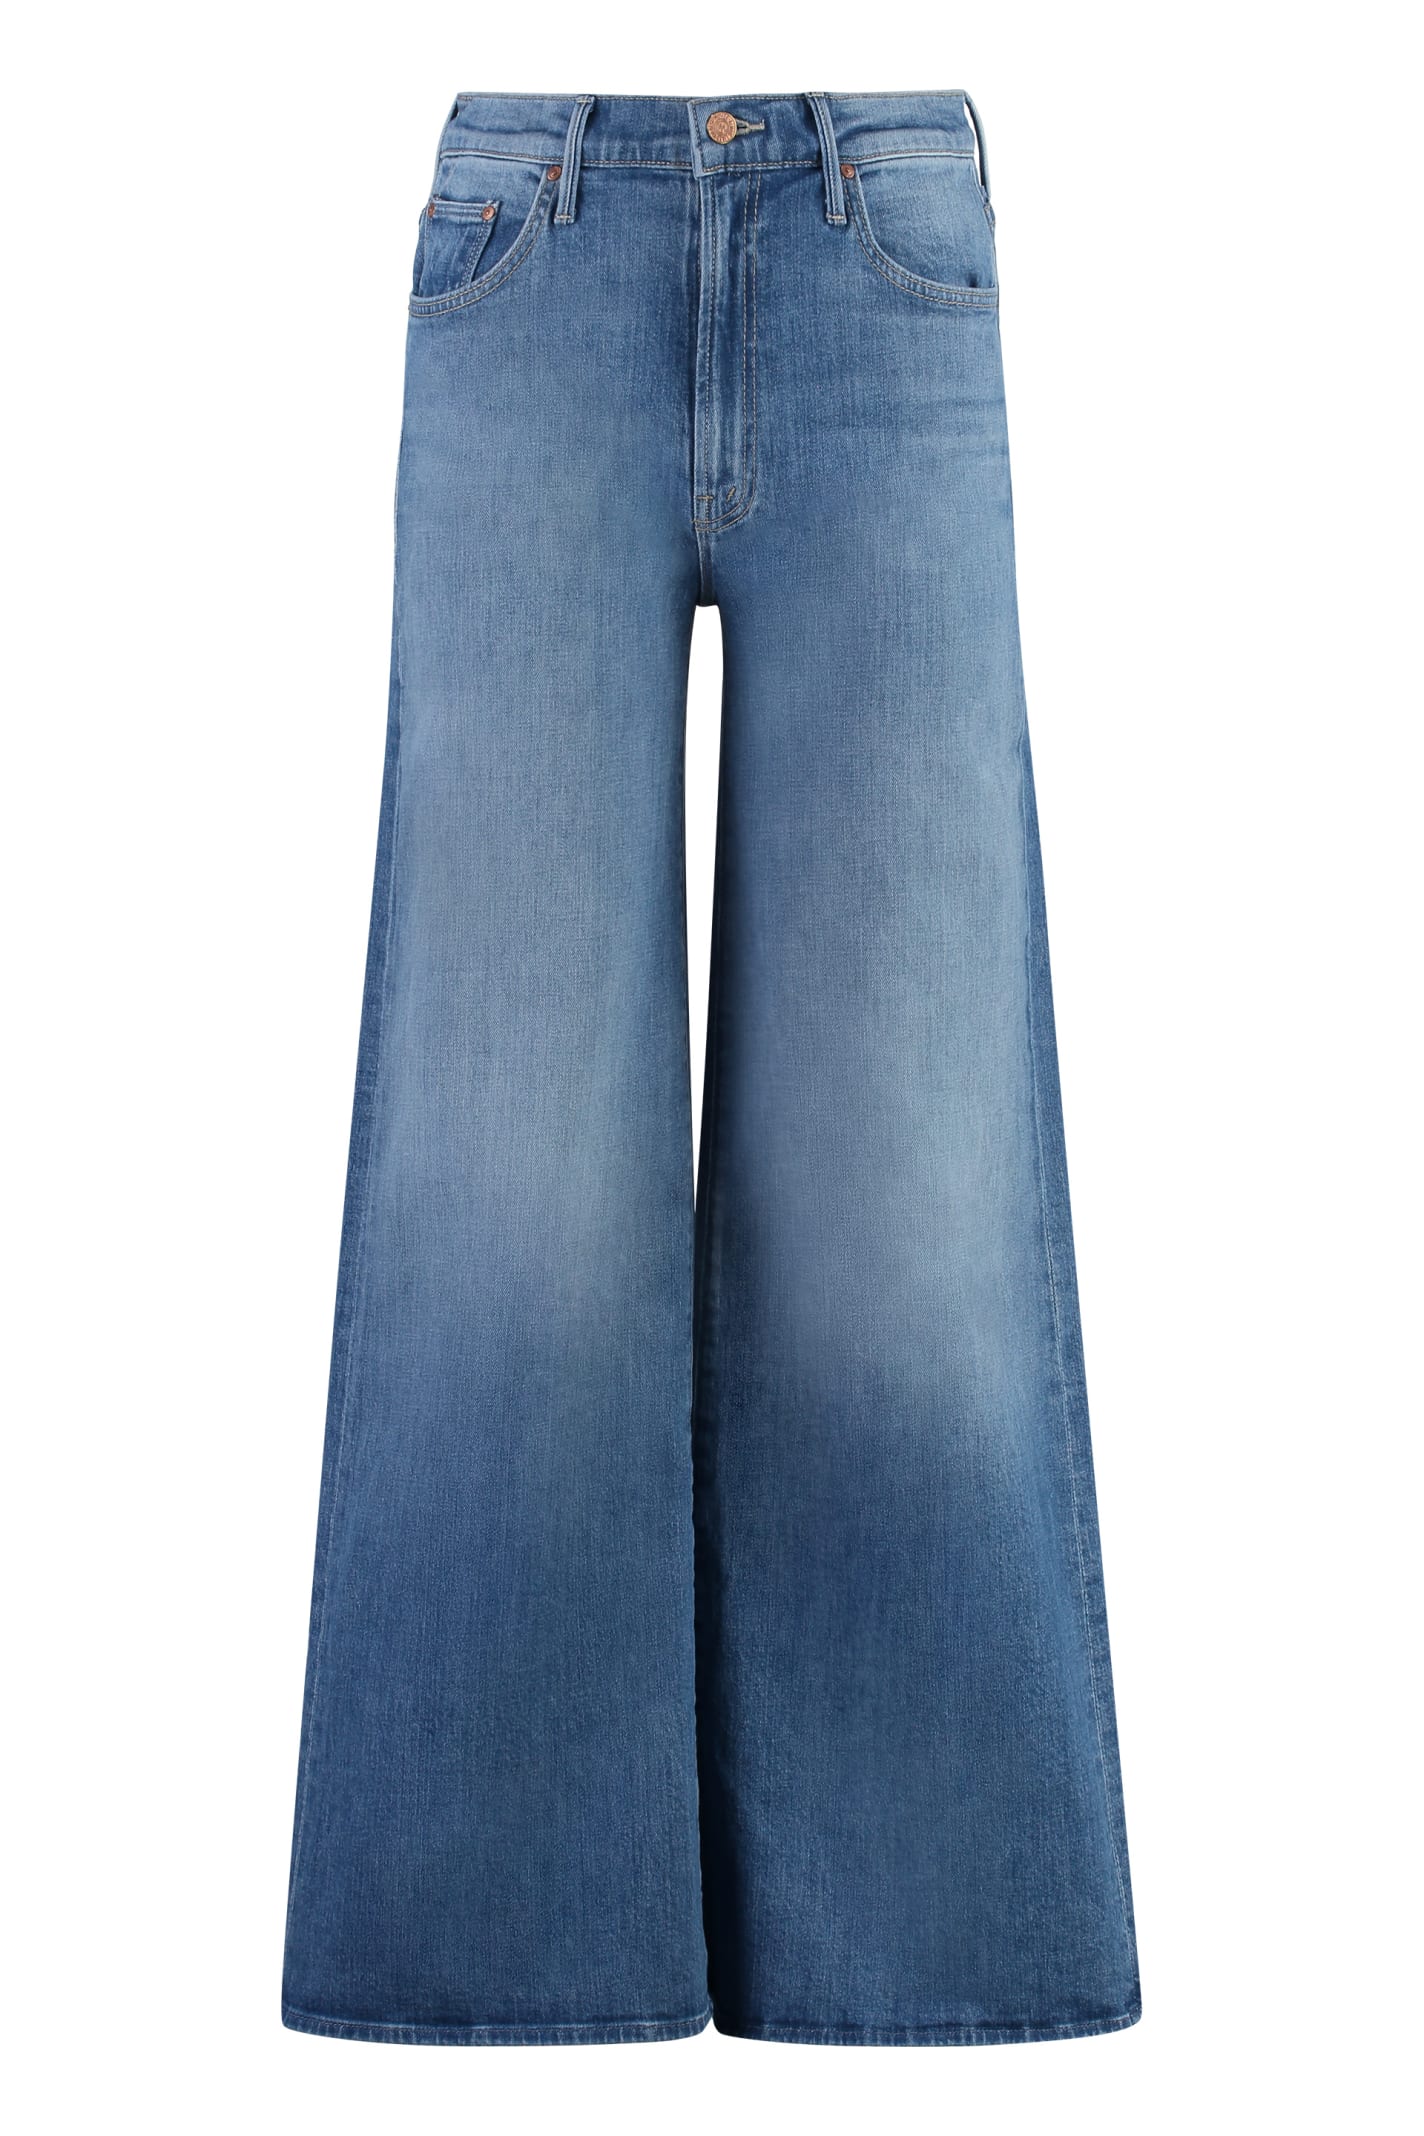 The Undercover Wide-leg Jeans